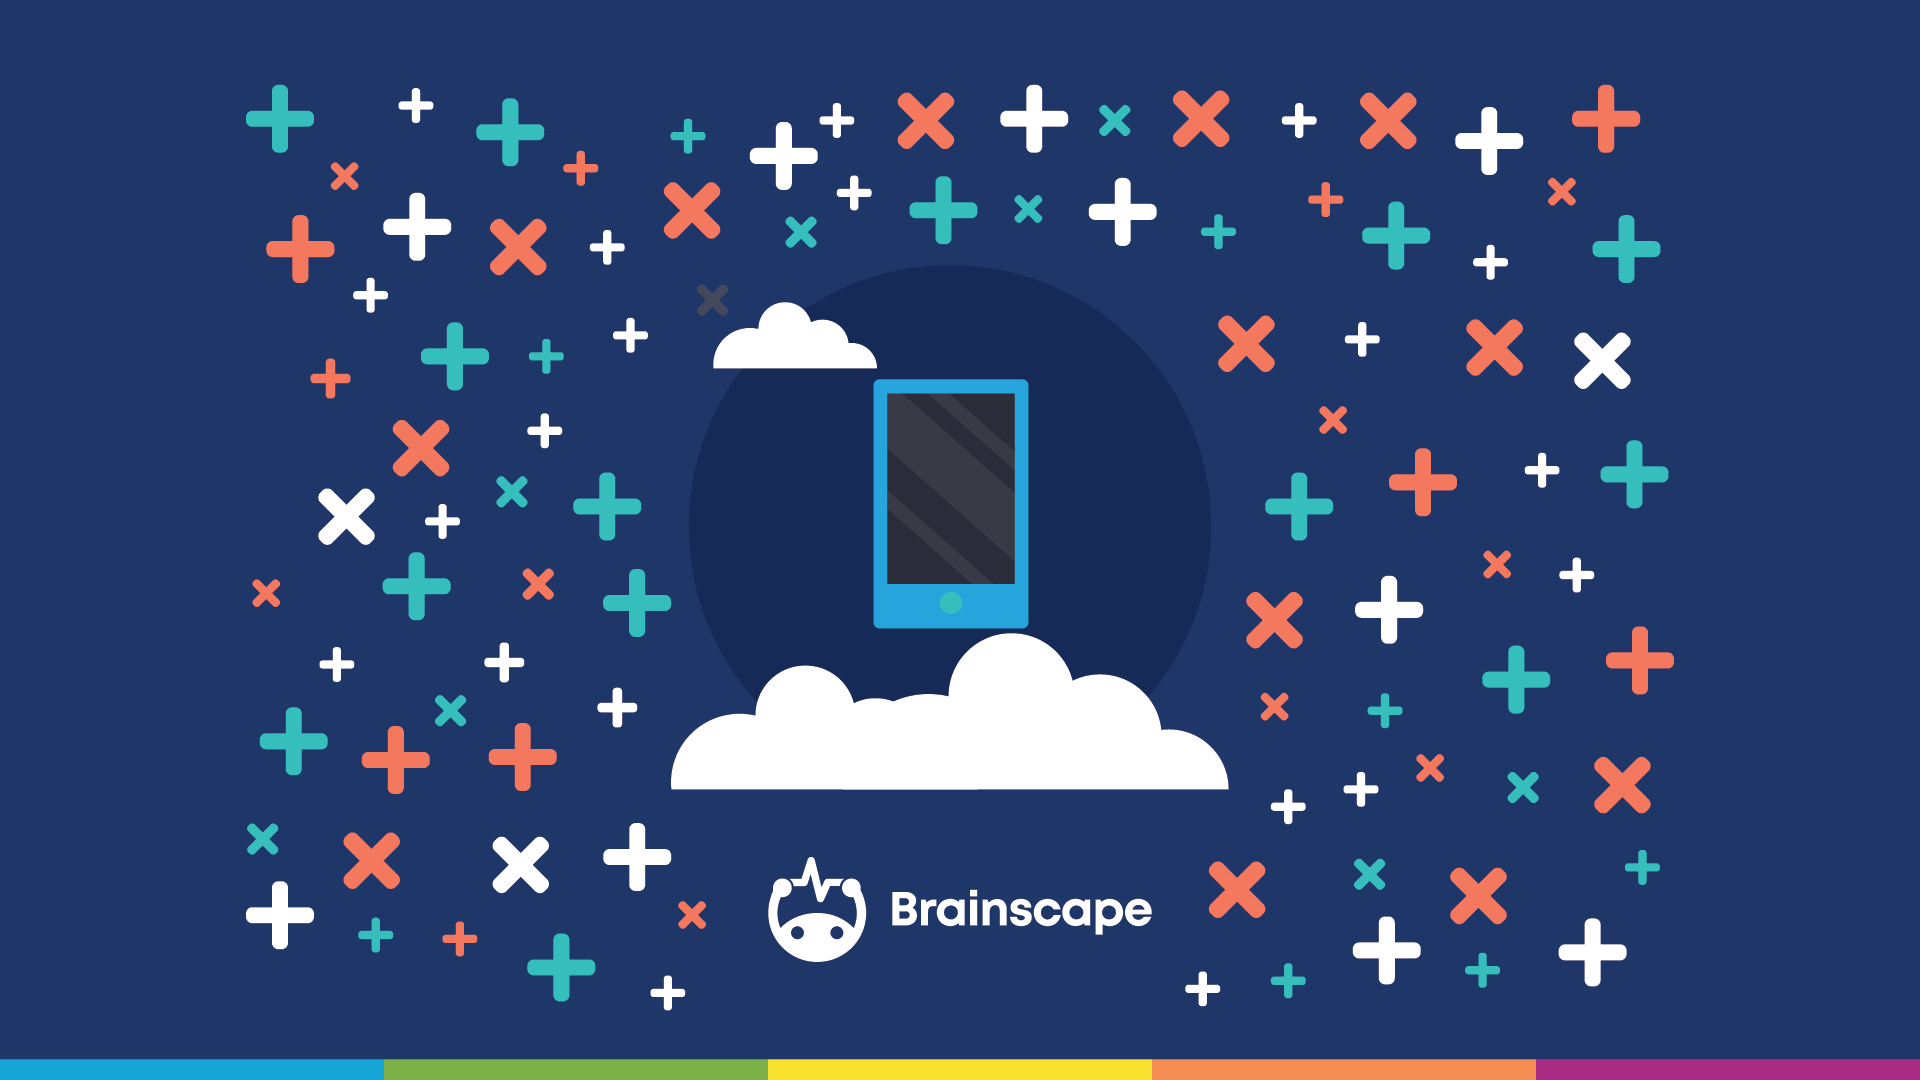 Brainscape helps increase your study motivation